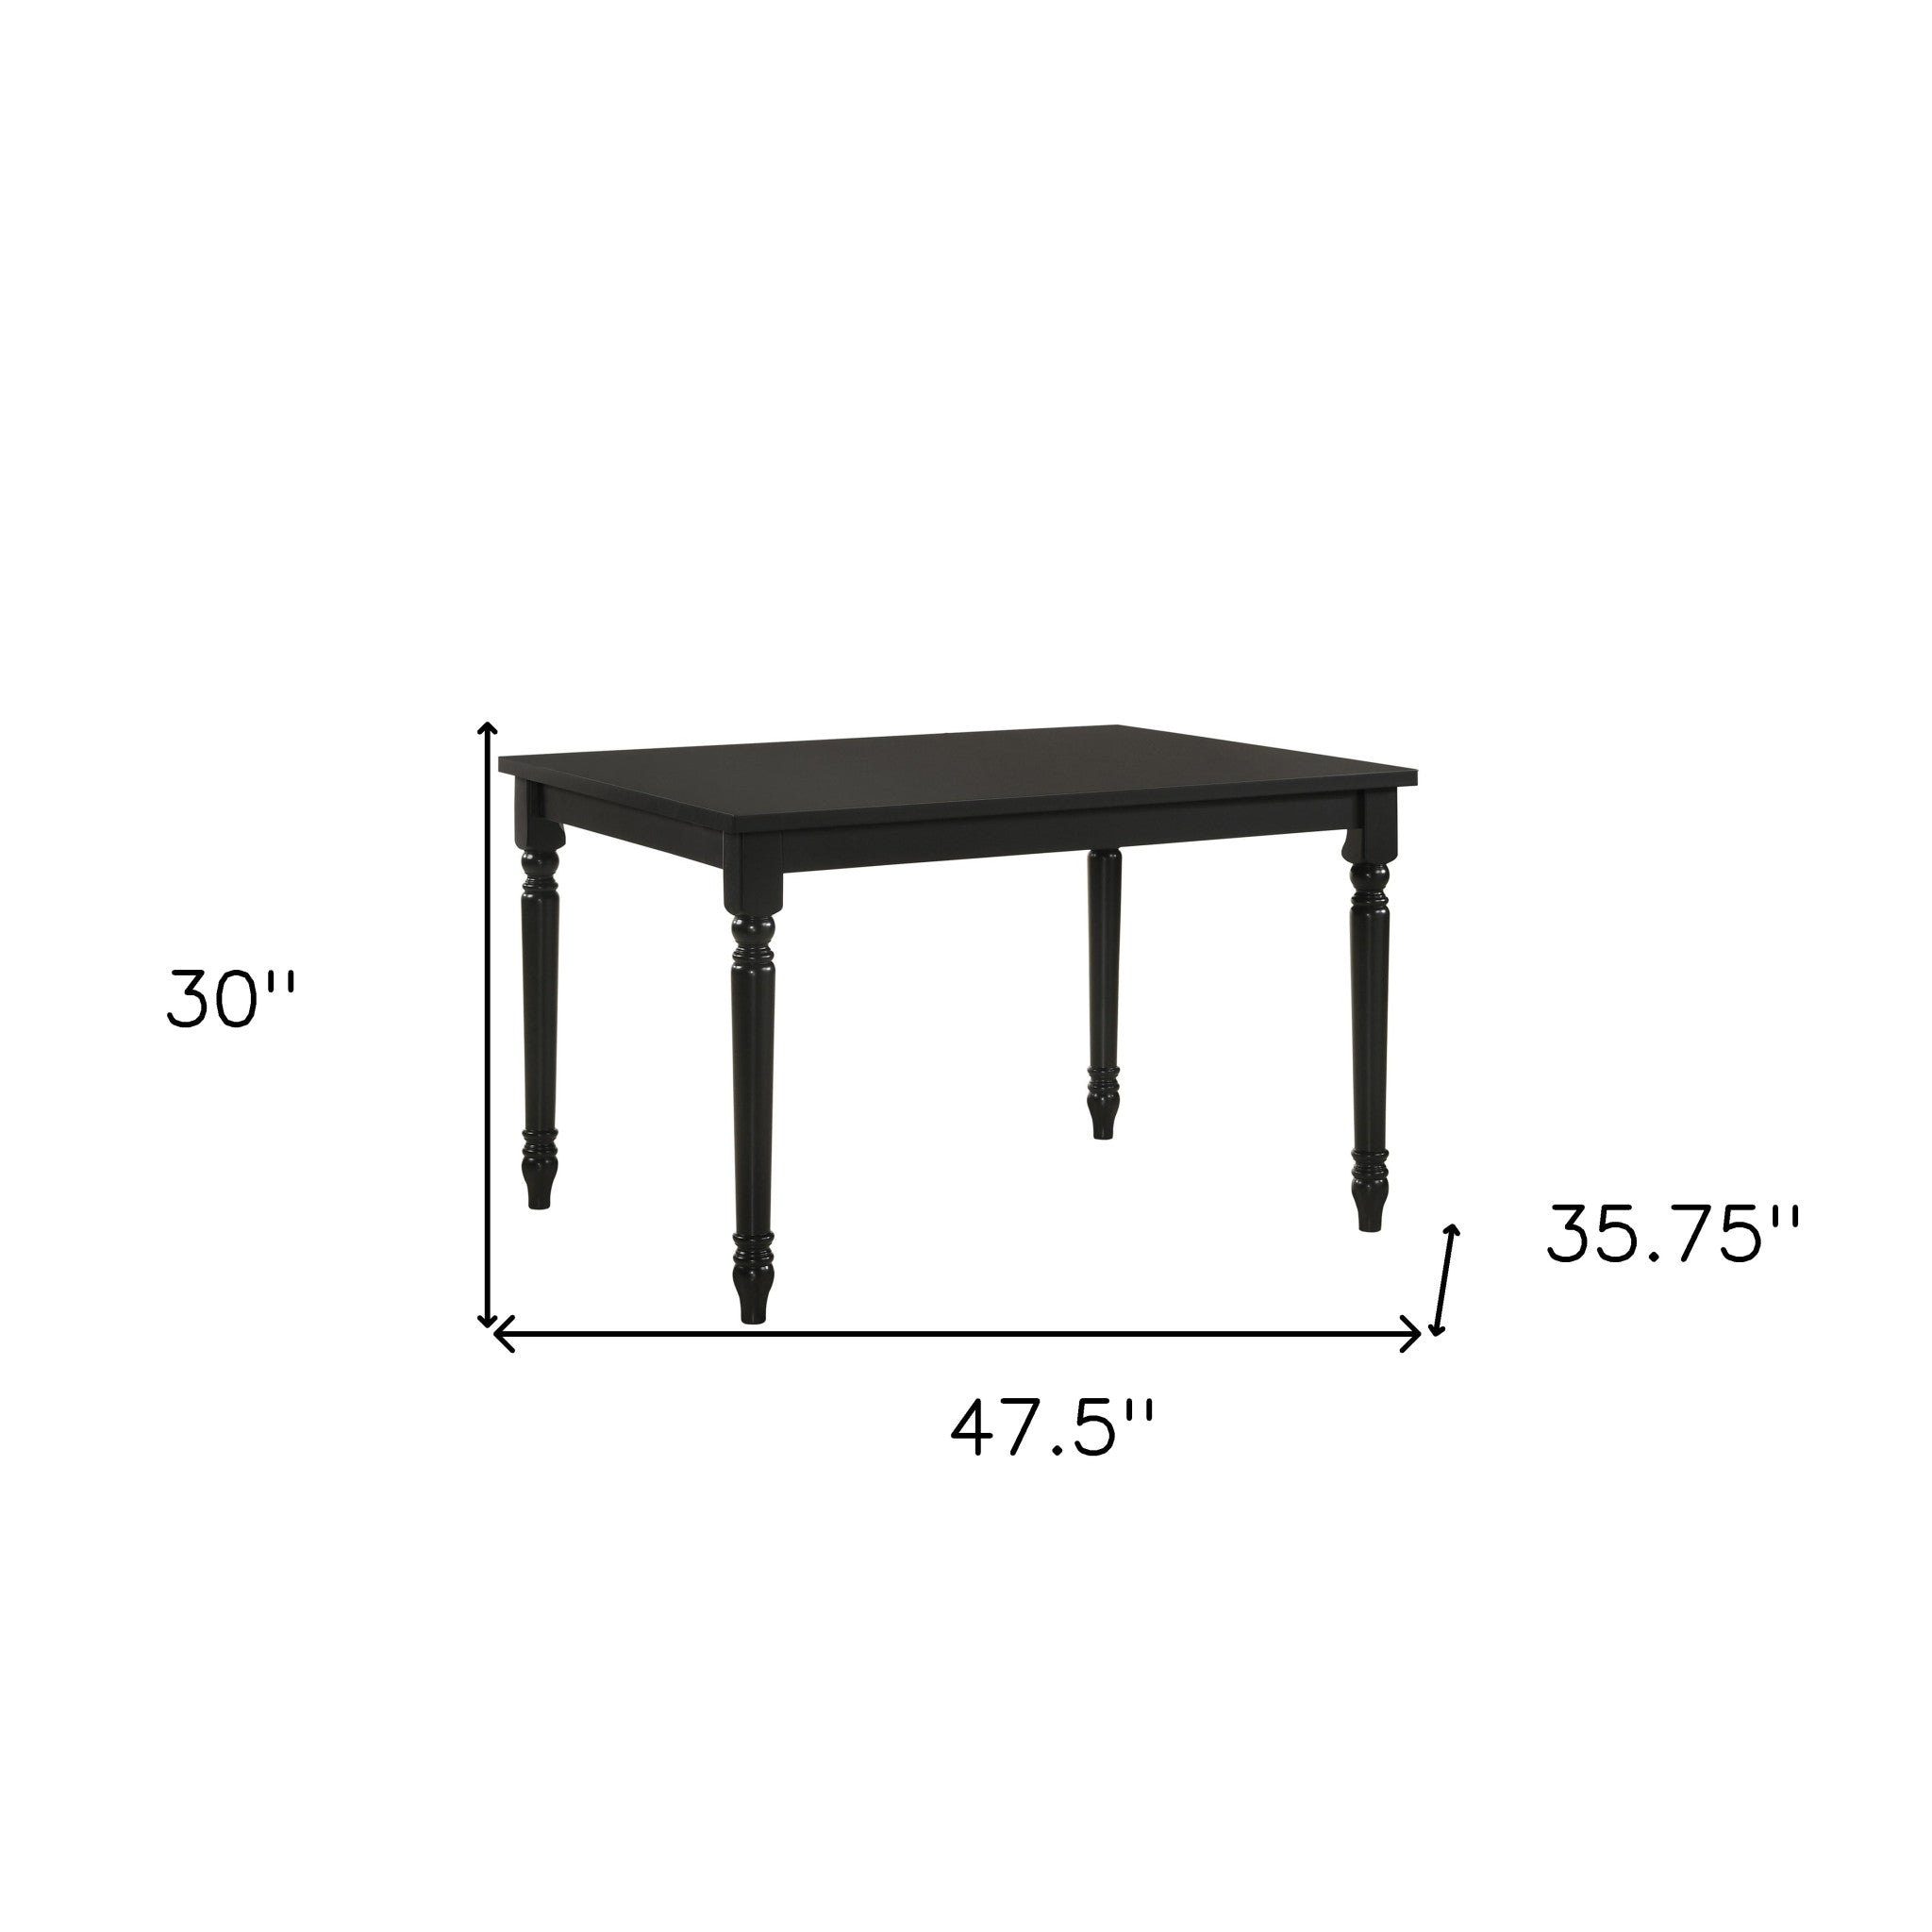 48" Black Solid Wood Dining Table